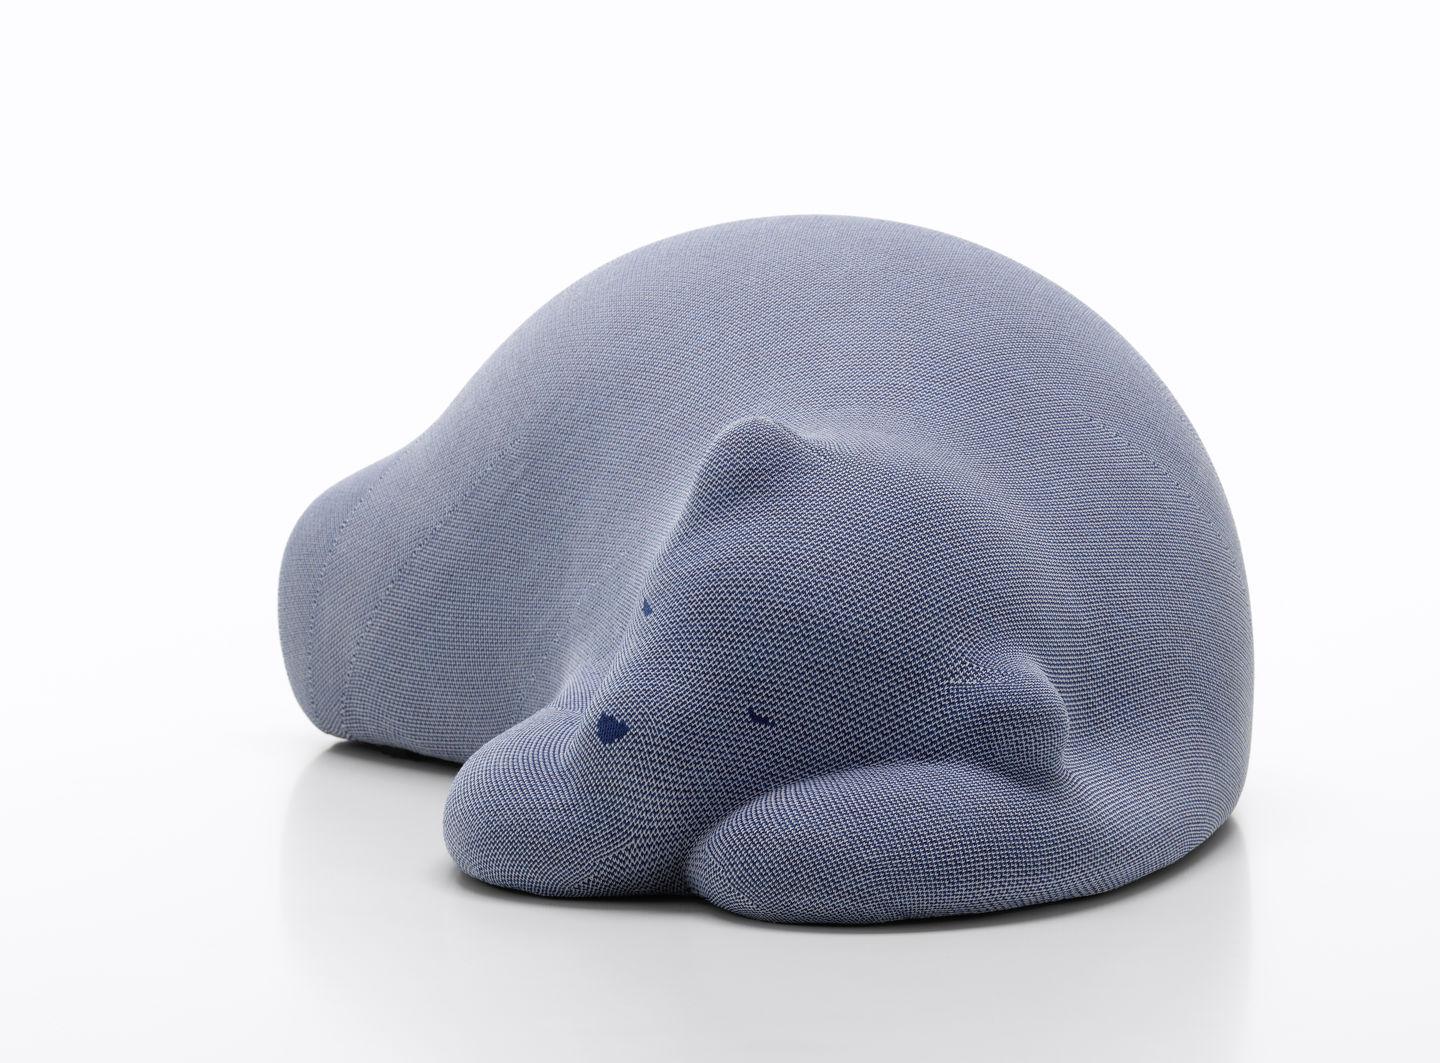 Resting Animals are the result of a recent research project by Front focussing on the close connection between humans and figurative objects. The design duo asked randomly selected people to identify the most emotionally enriching and meaningful